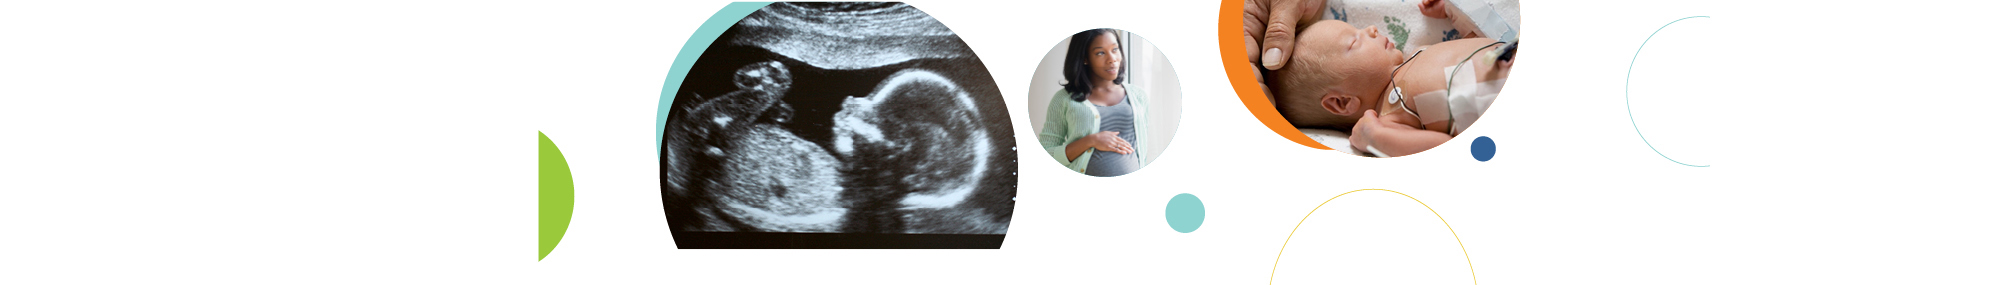 A series of three circular images related to preterm birth, including an ultrasound image (left), a pregnant person (center), and a newborn in a hospital bassinet (right). 